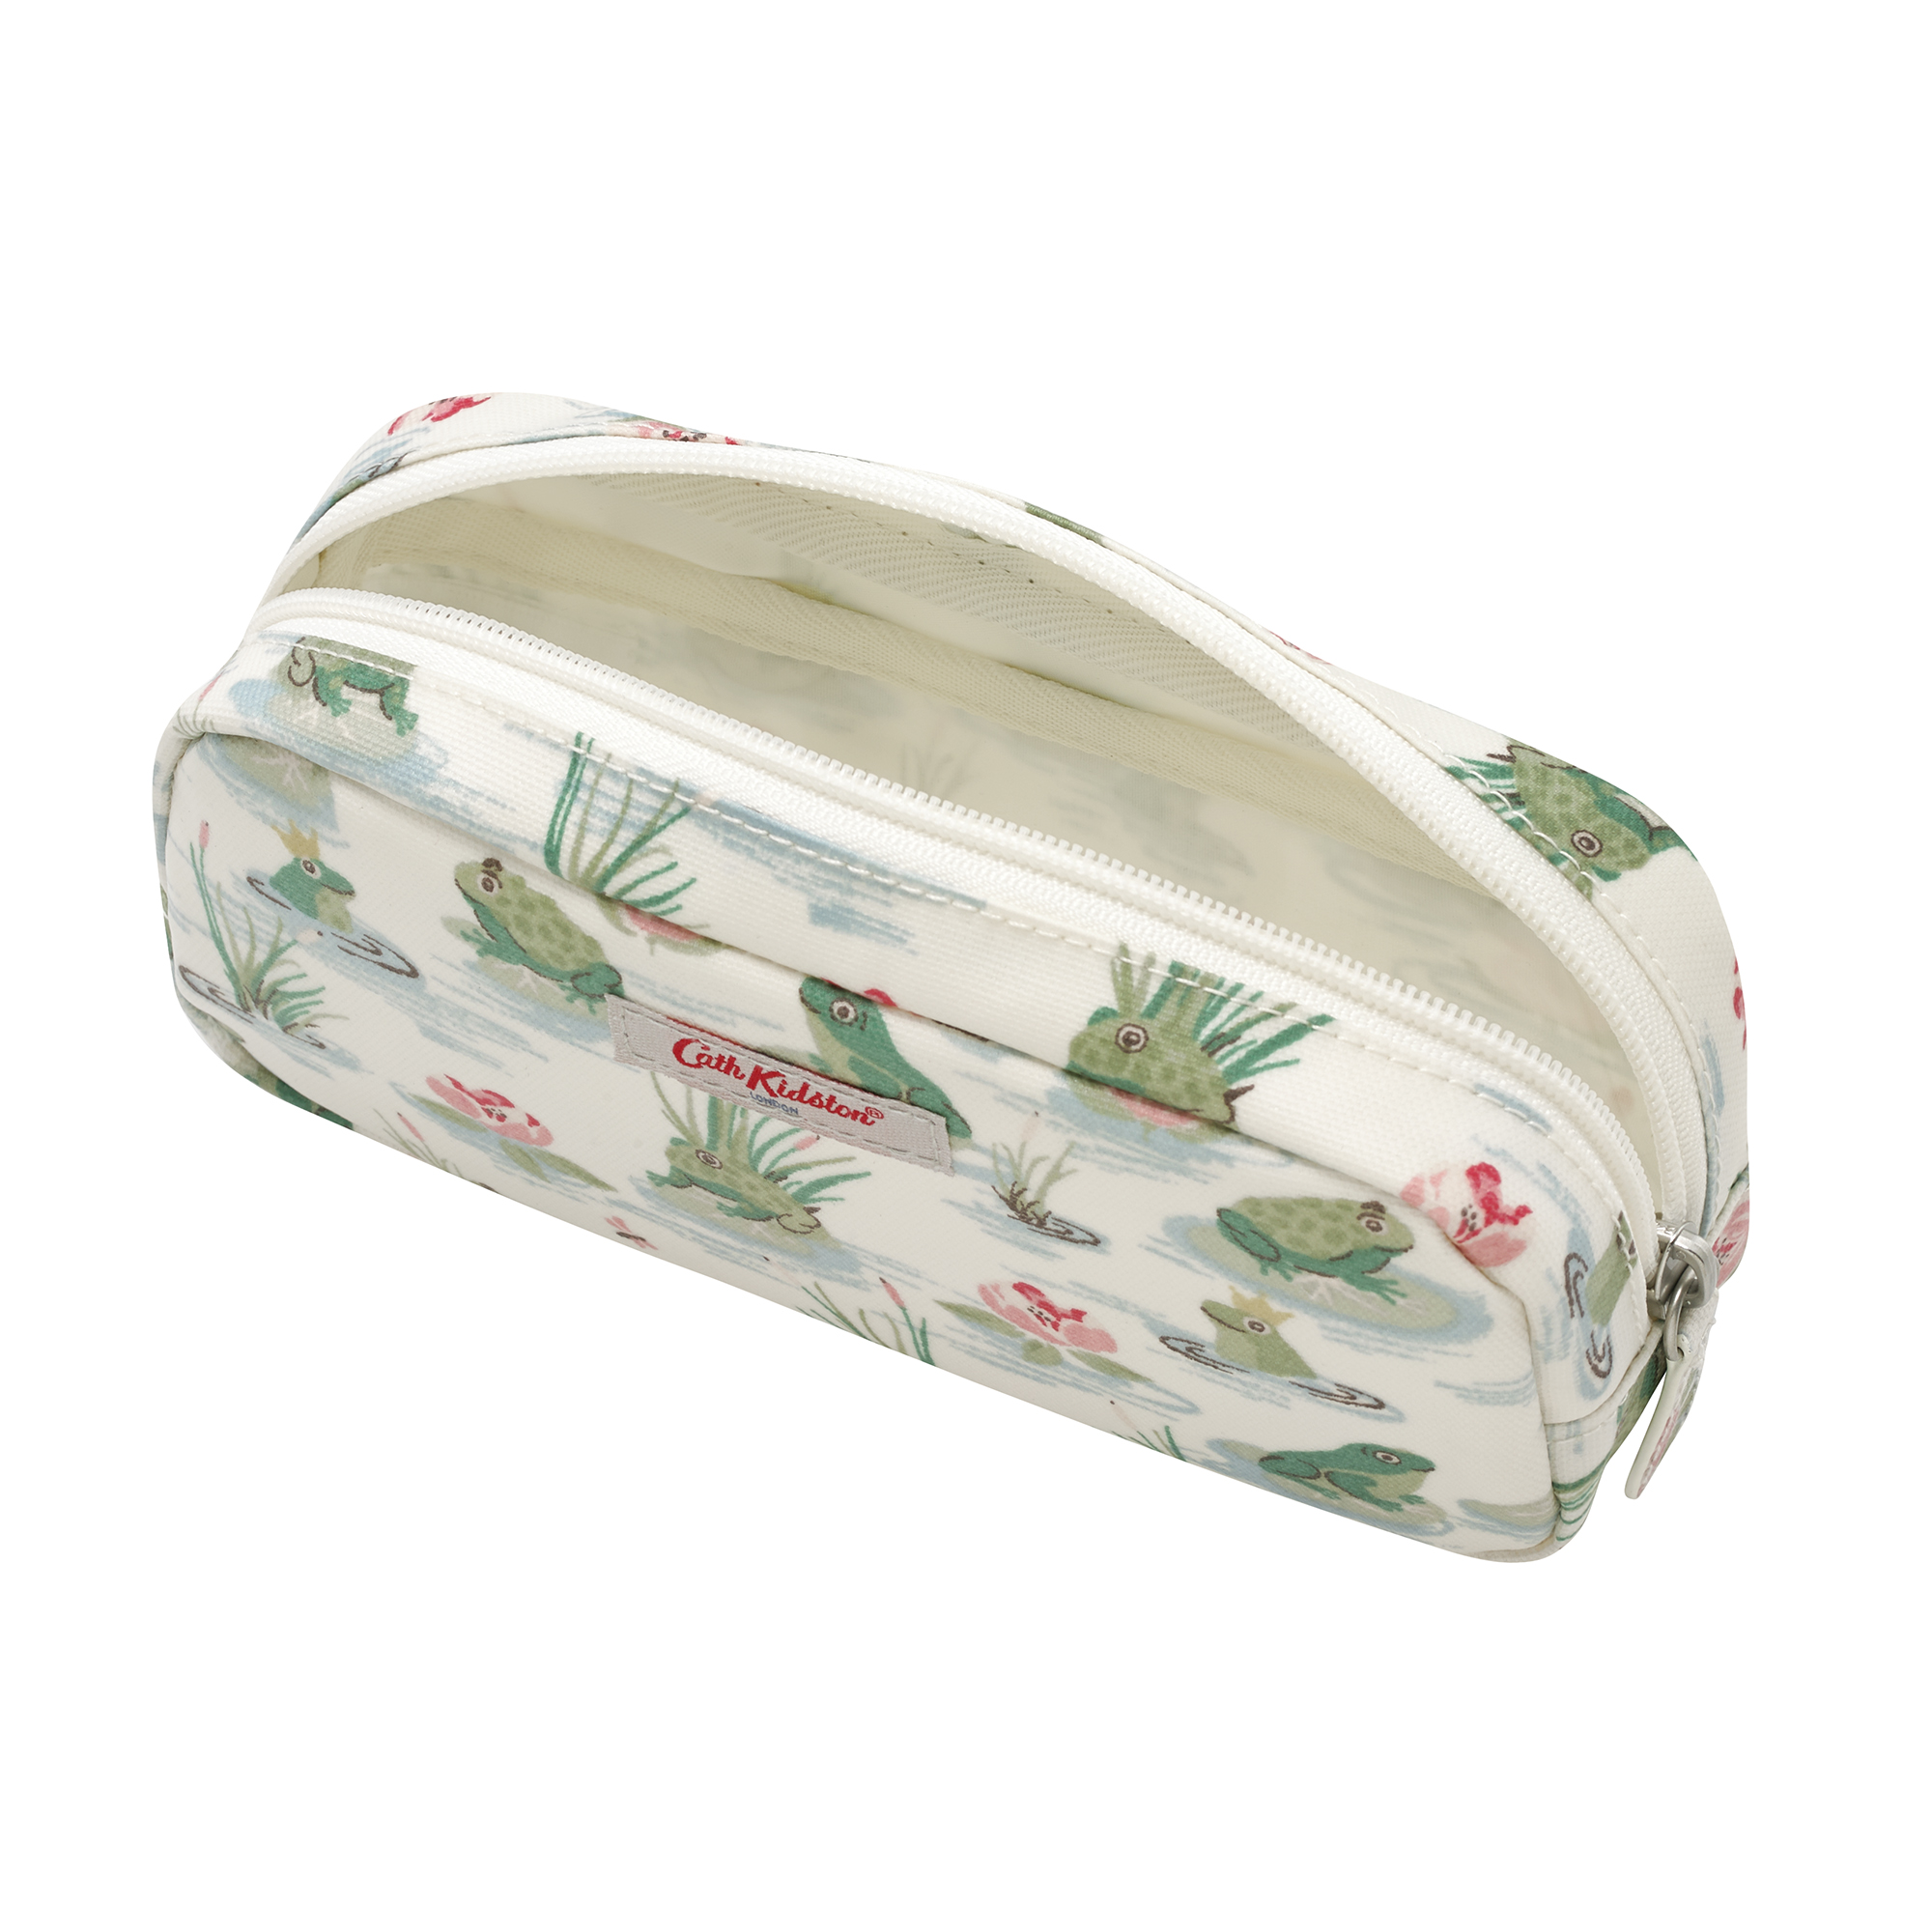 Hộp bút Cath Kidston họa tiết Bathing Frogs (Pencil Case with Pocket Bathing Frogs)